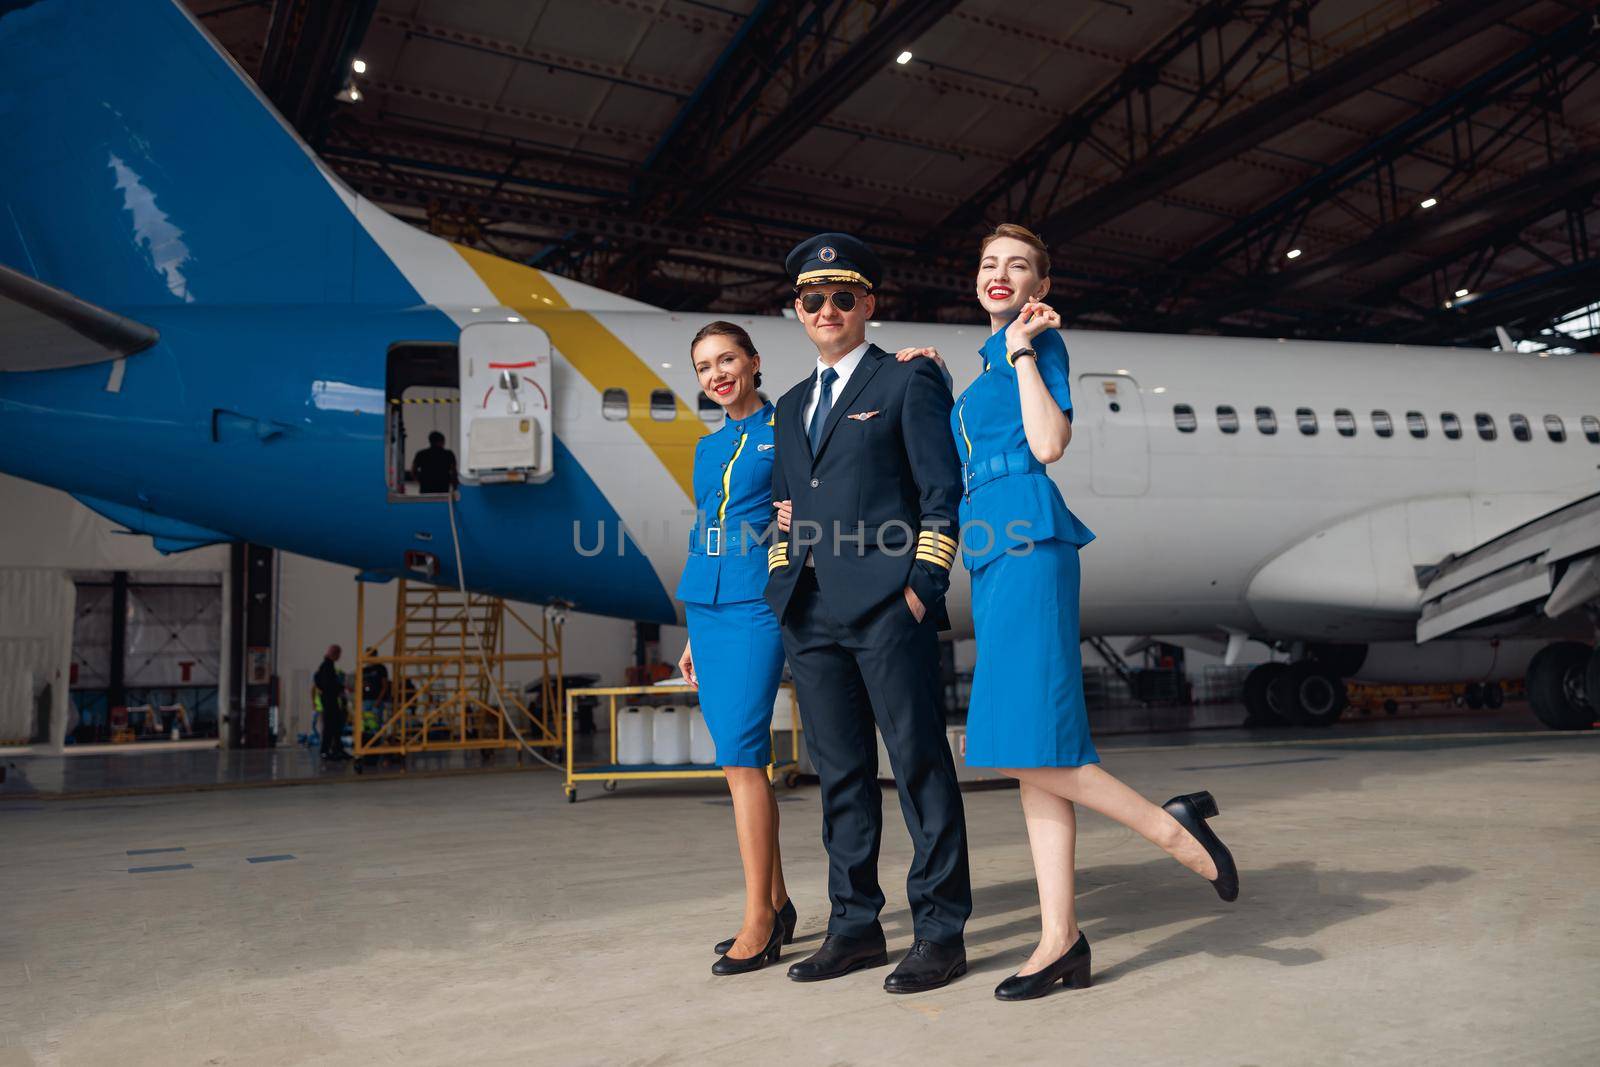 Full length shot of pilot in uniform and aviator sunglasses standing together with two air stewardesses in blue uniform in front of big passenger airplane in airport hangar by Yaroslav_astakhov